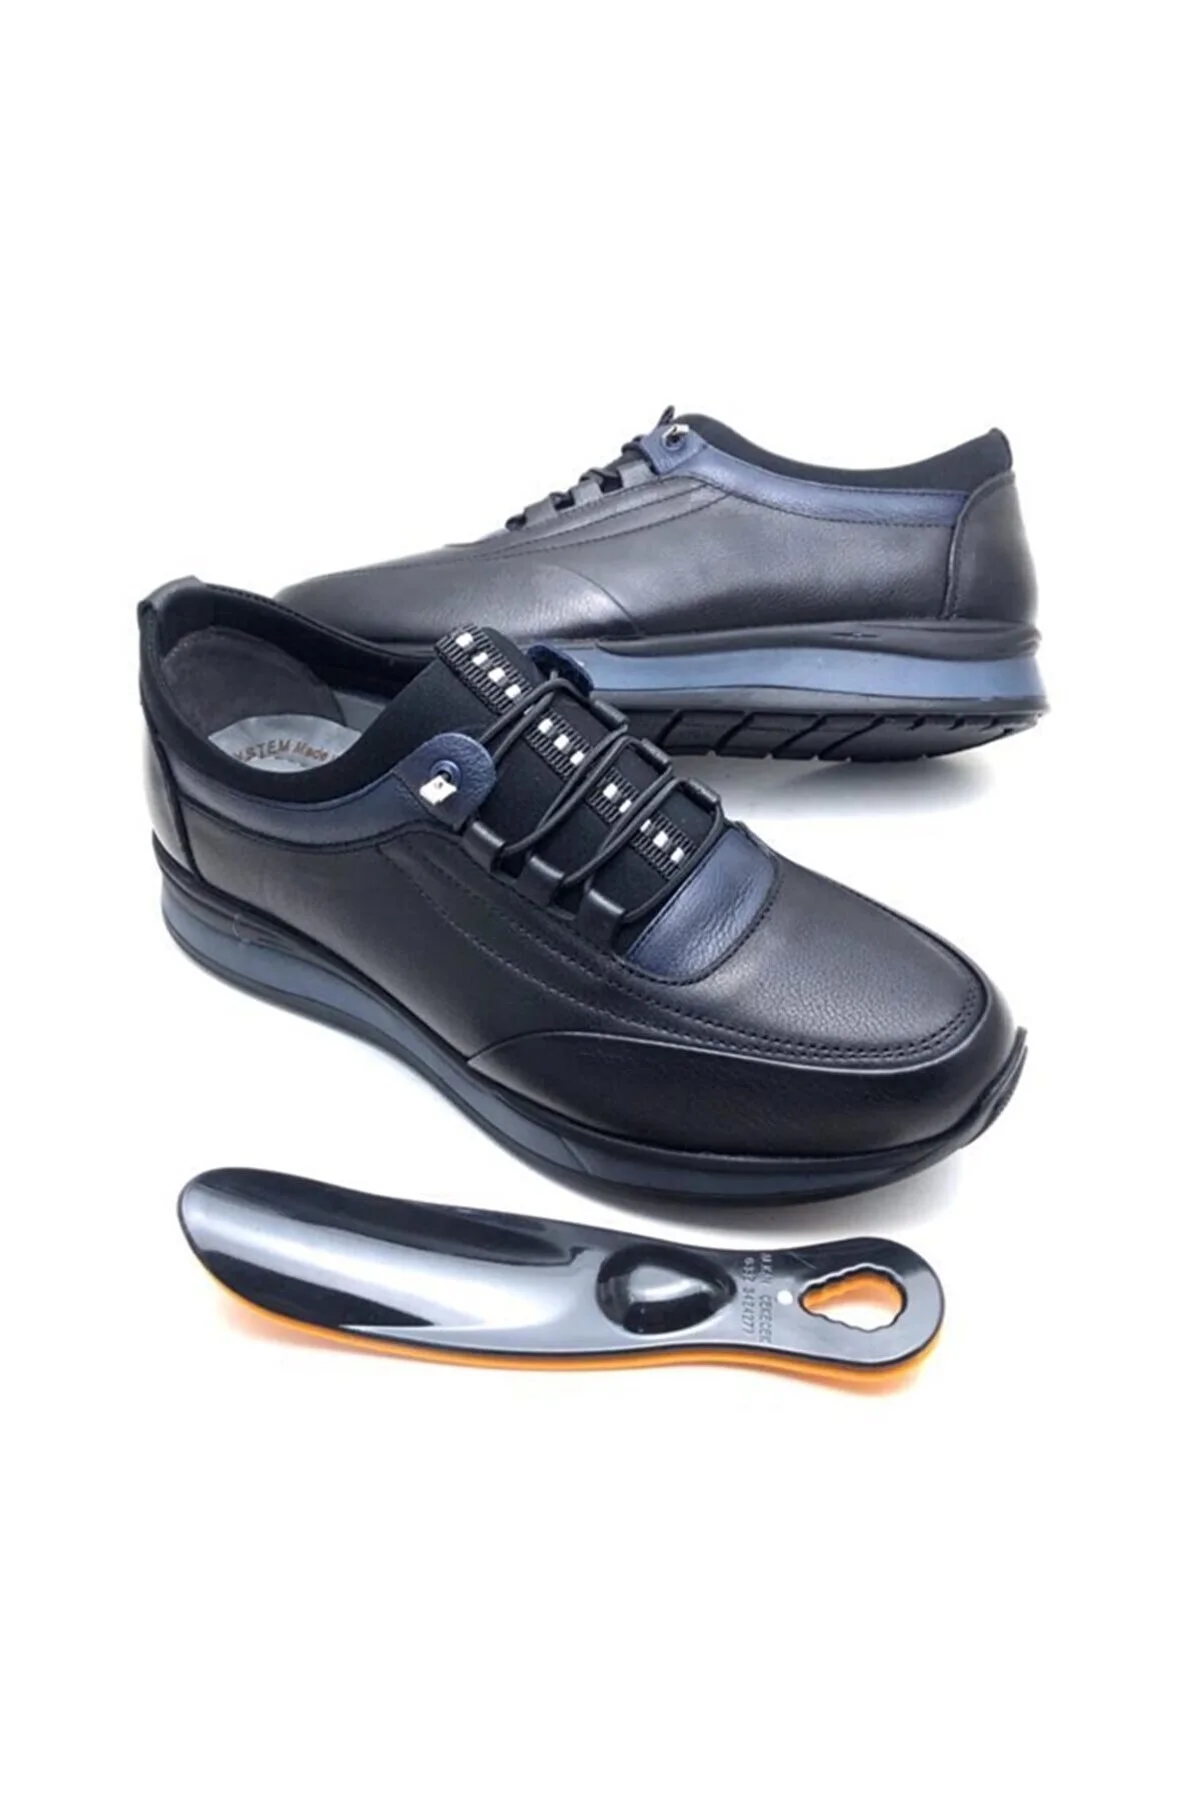 Genuine Leather Full Orthopedic Men Shoes Daily Hiking Waterproof Comfortable Breathable New Fashion Business Work